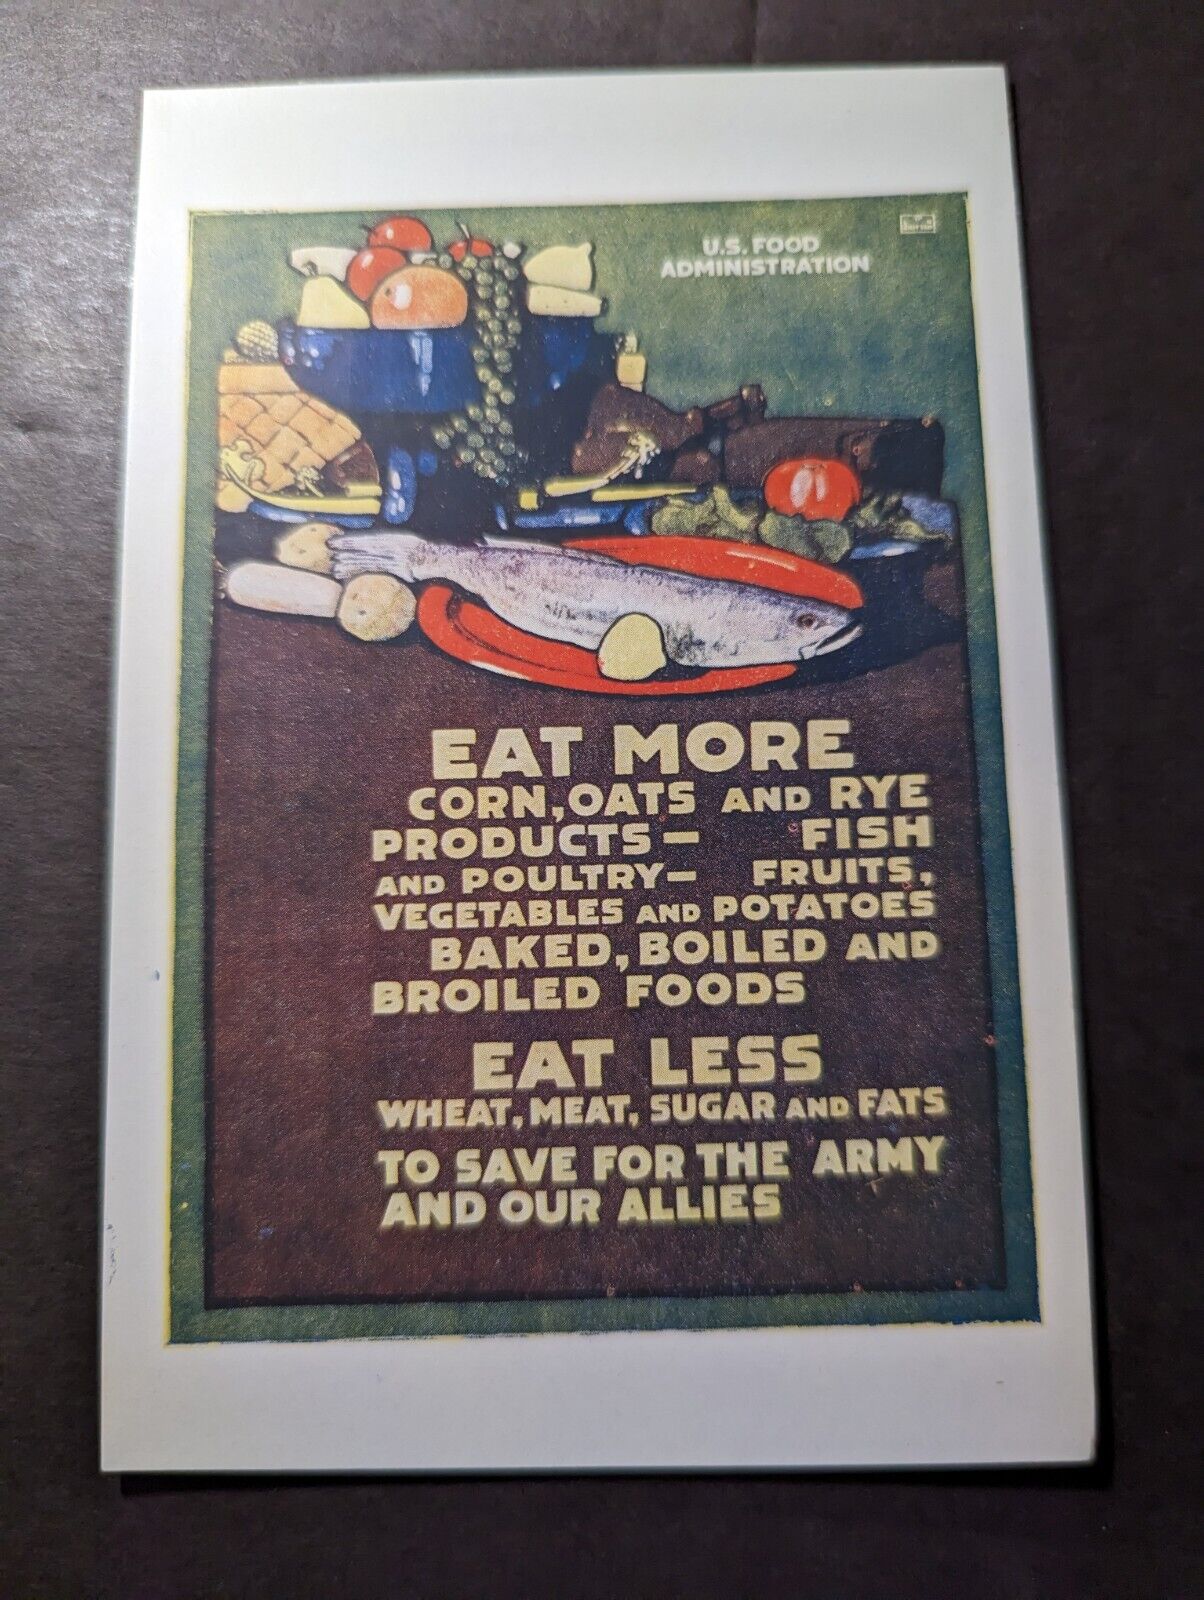 Mint France WWI Postcard US Food Administration Eat More Eat Less Save for Army